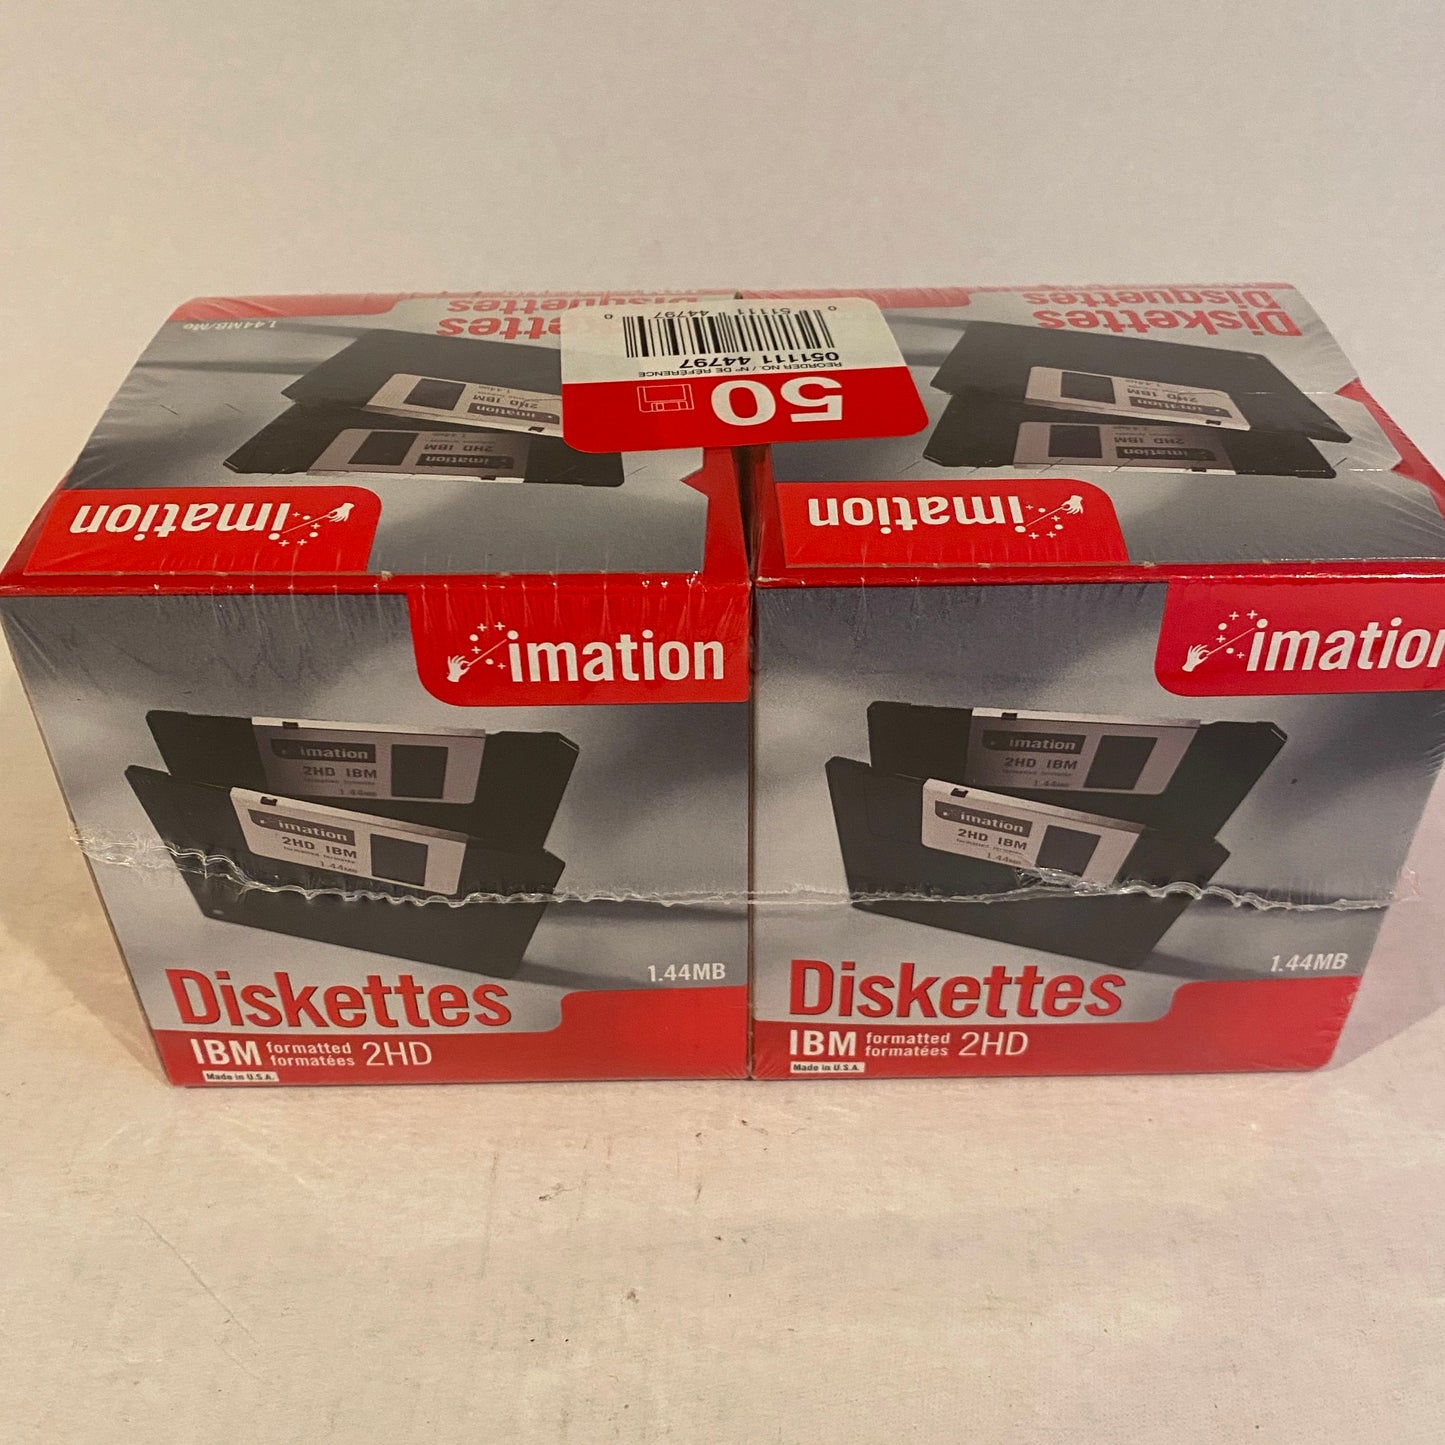 Imation IBM Formatted 2HD Diskettes - 50 pack